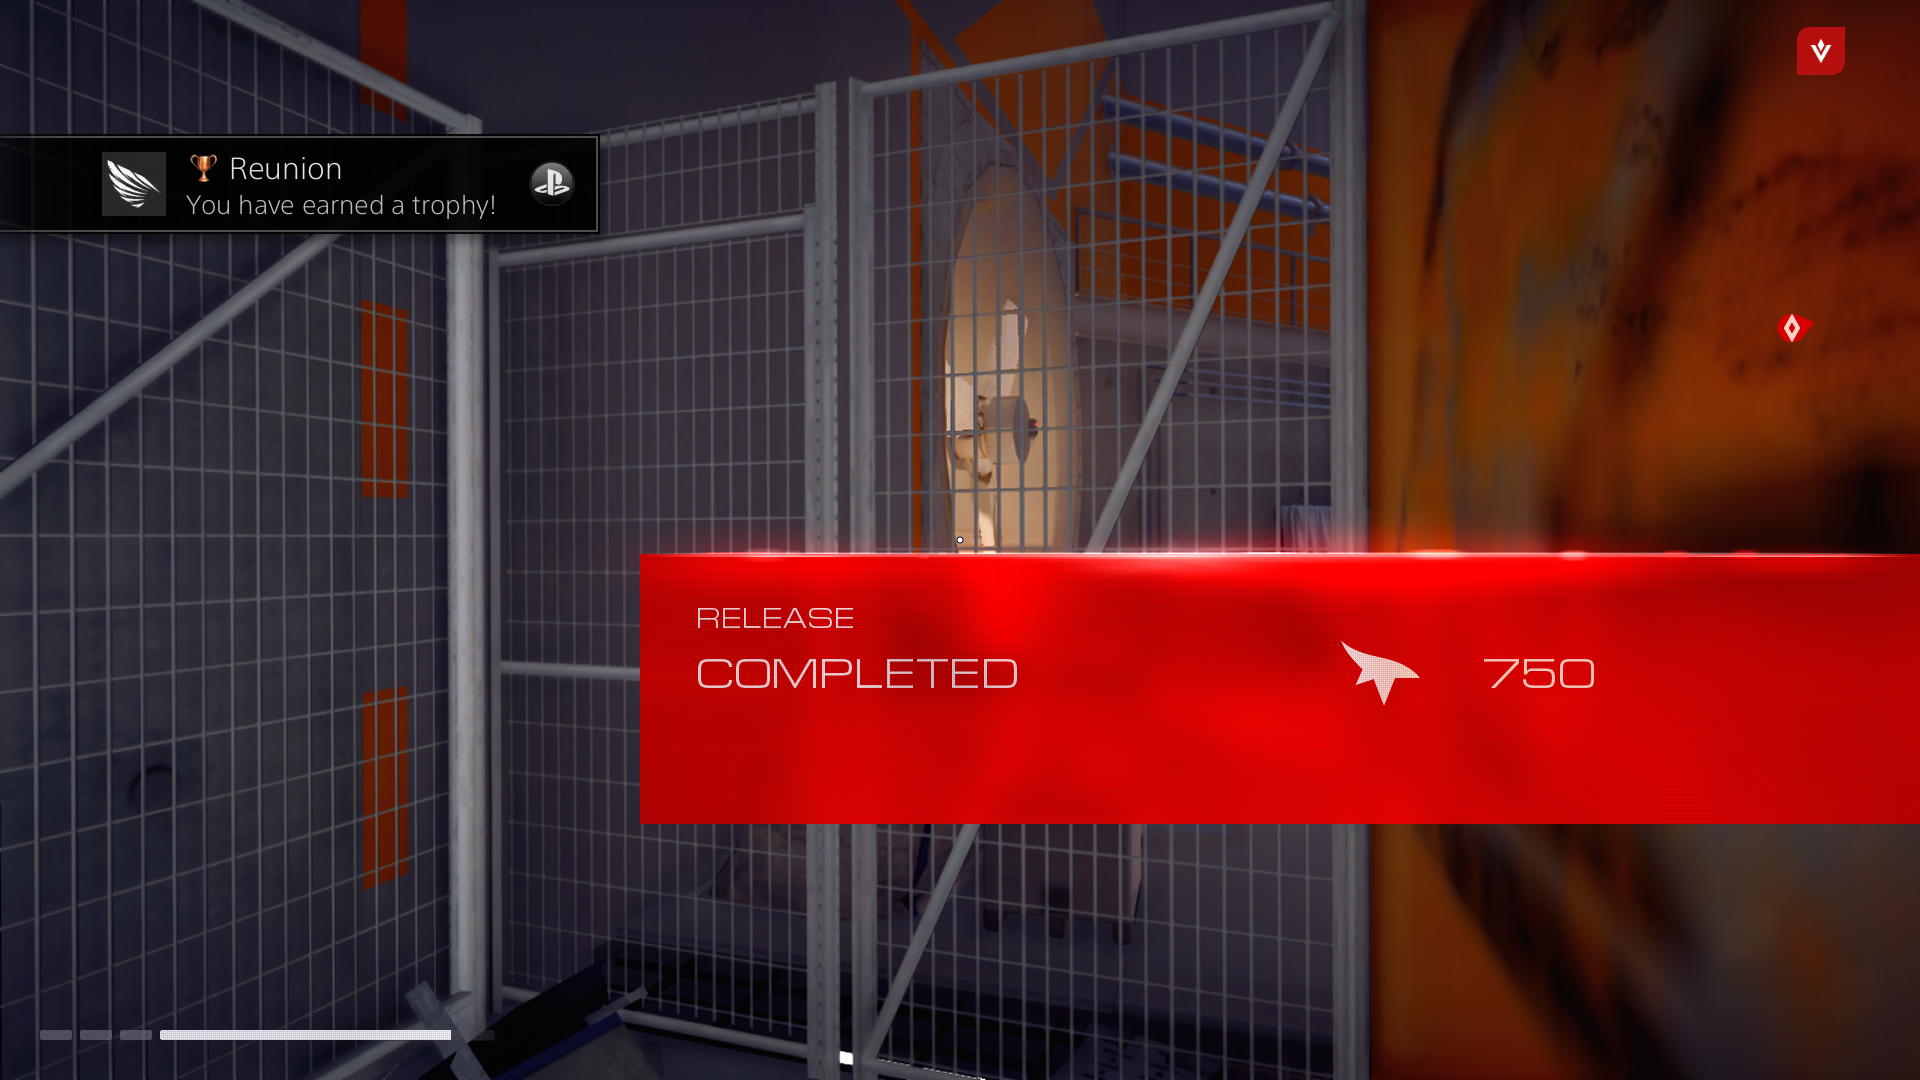 Are these all the online trophies in Mirror's Edge Catalyst? : r